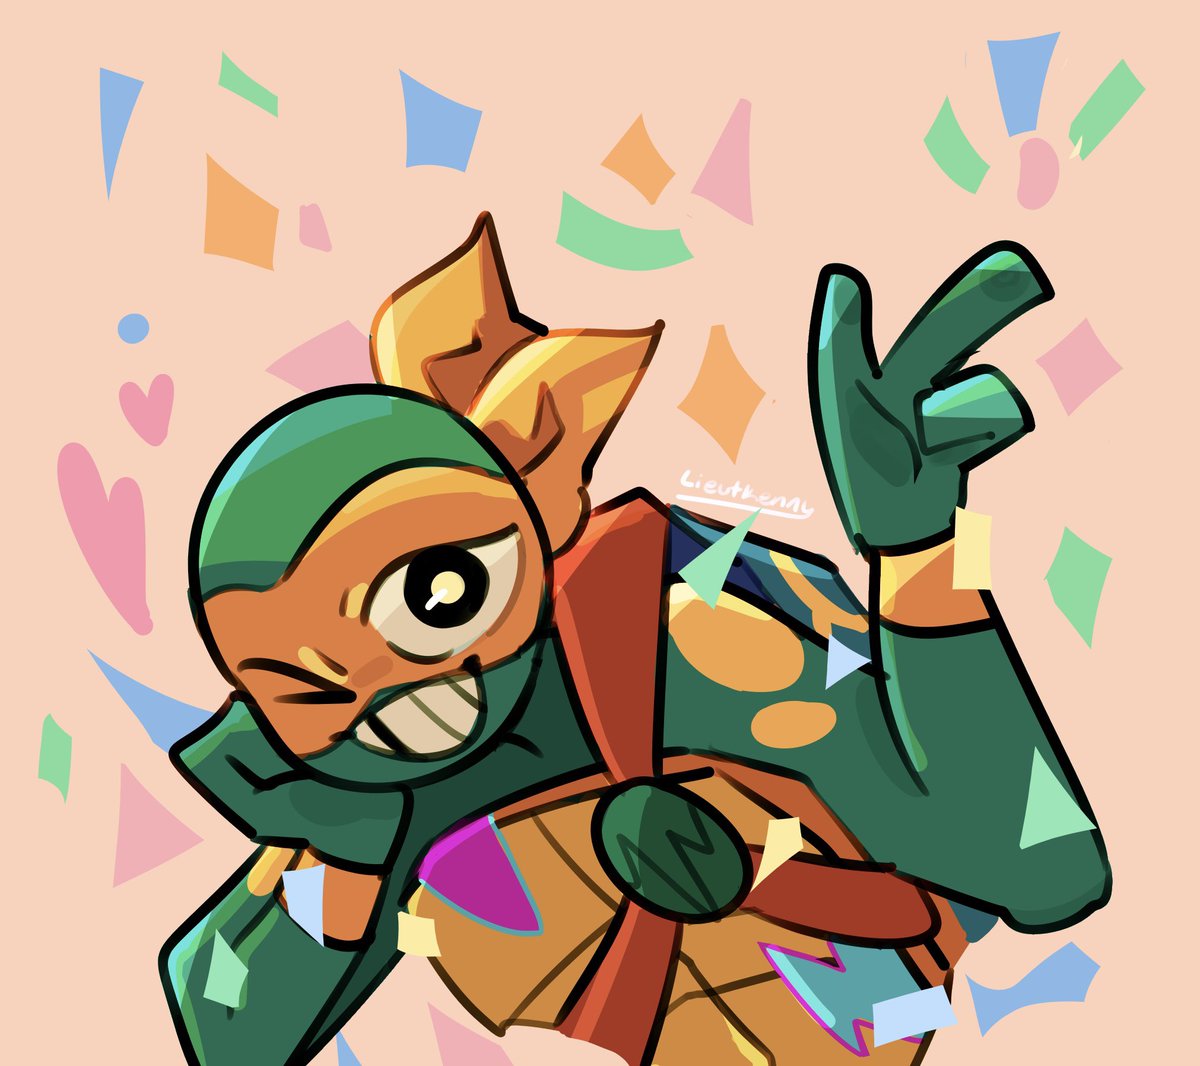 「Look at Mikey! #rottmnt 」|Kenのイラスト